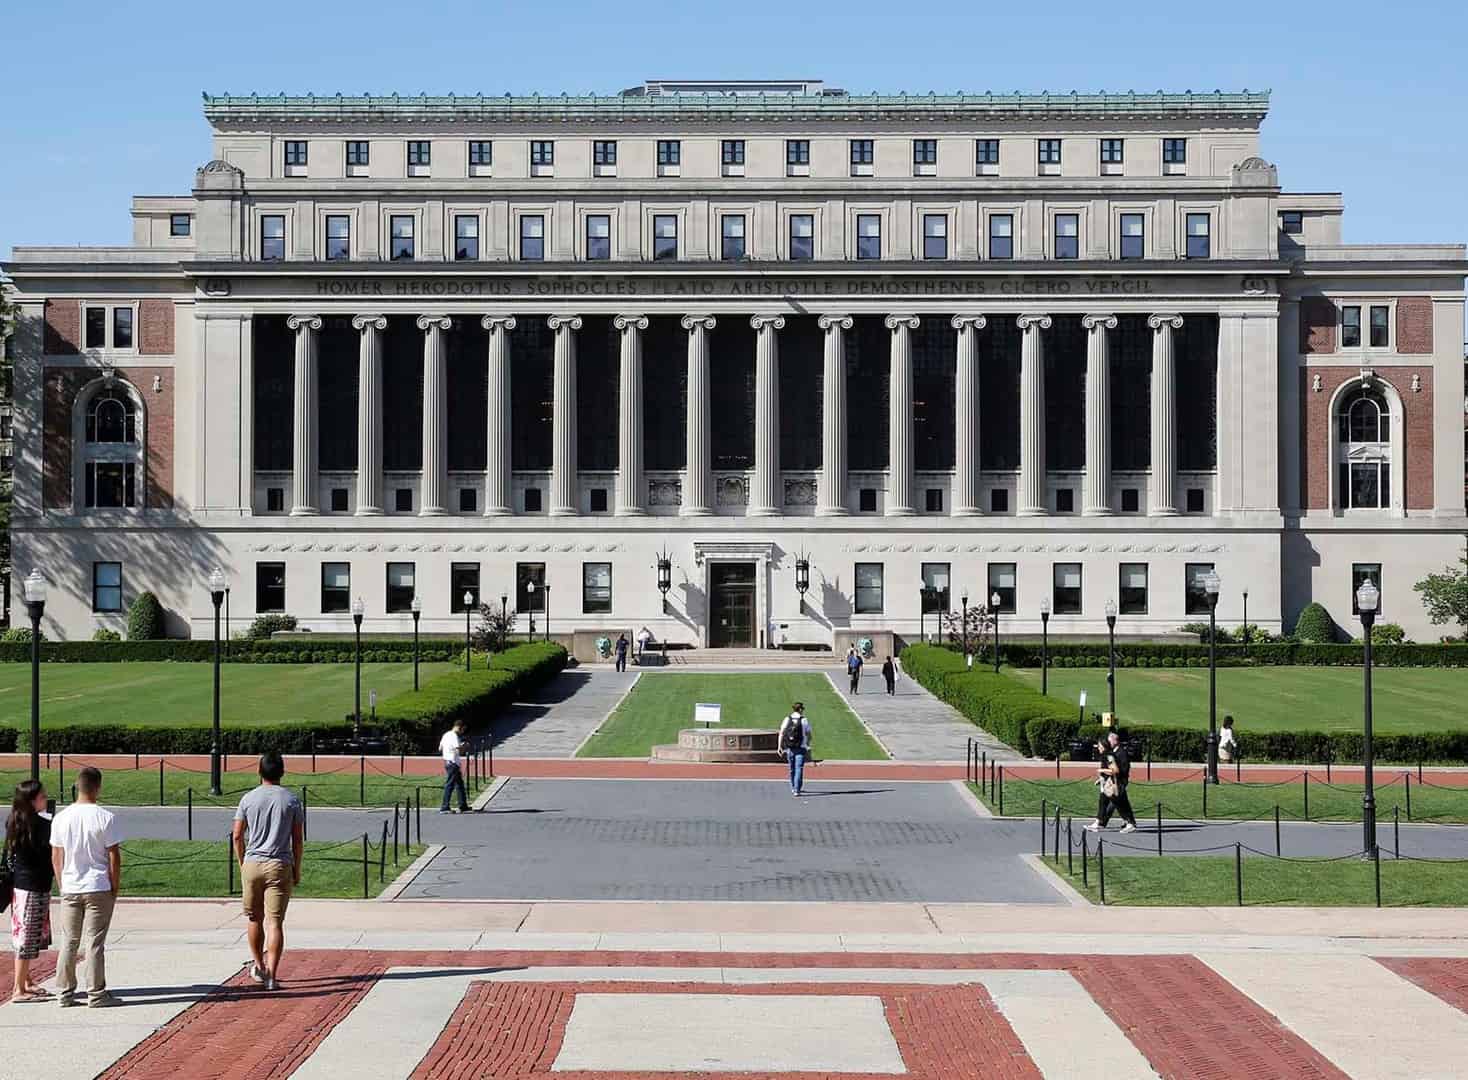 One year MBA at Columbia, USA - OneYearMBA.co.in